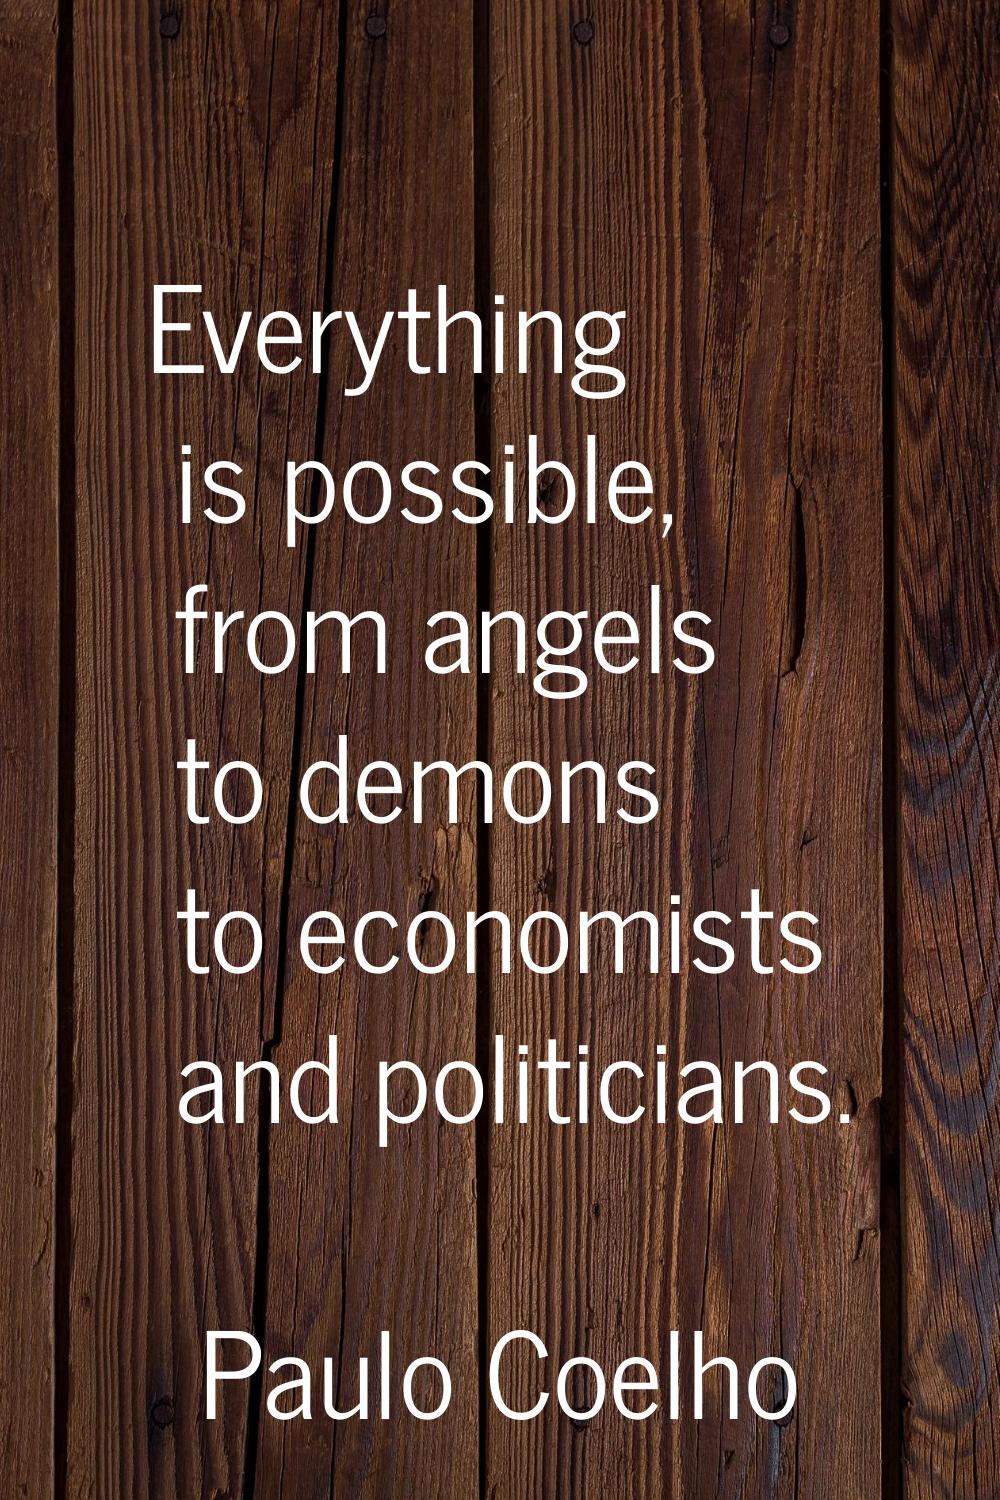 Everything is possible, from angels to demons to economists and politicians.